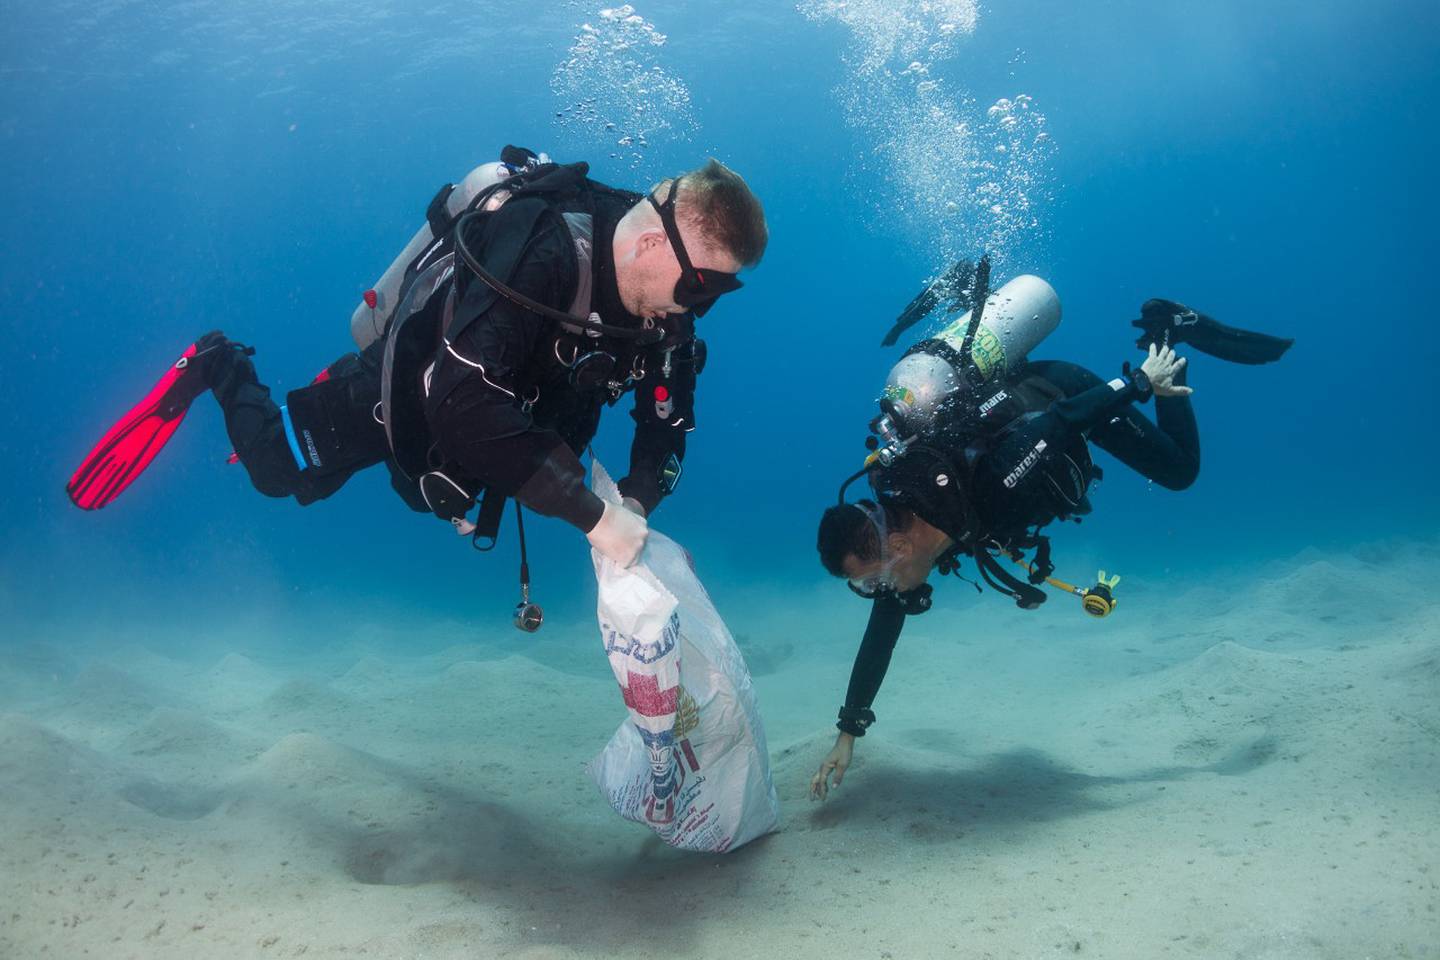 Diving centres in Sharm El Sheikh undertake clean-up initiatives to save the Red Sea’s ecosystem. Photo: Jovana Milanko